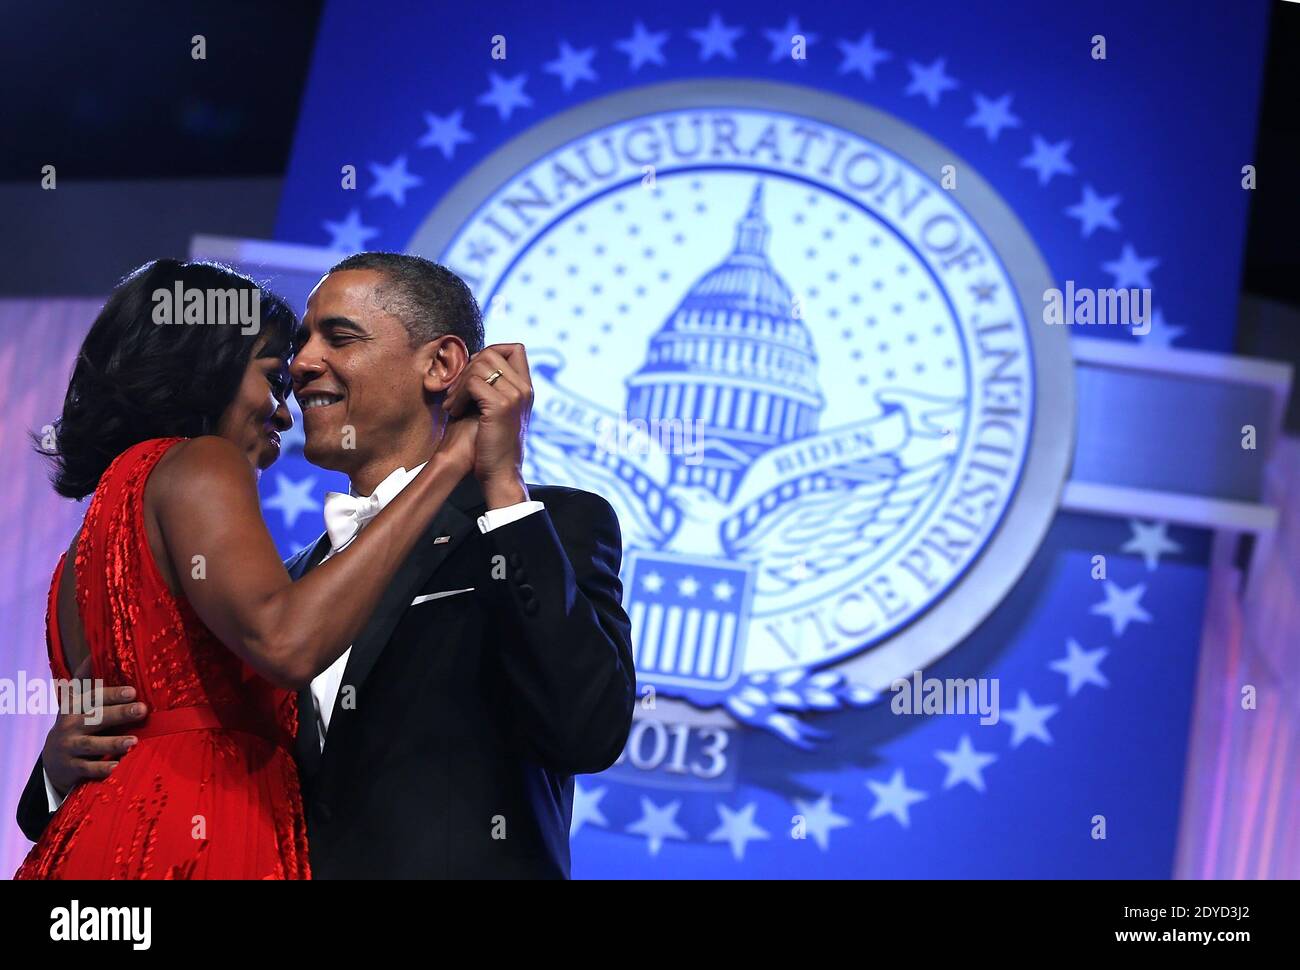 U.S. President Barack Obama dances with first lady Michelle Obama during the Inaugural Ball January 21, 2013 at Walter E. Washington Convention Center in Washington, DC. President Obama was sworn-in for a second term as the 44th President of the United States. Photo by Alex Wong/Pool/ABACAPRESS.COM Stock Photo